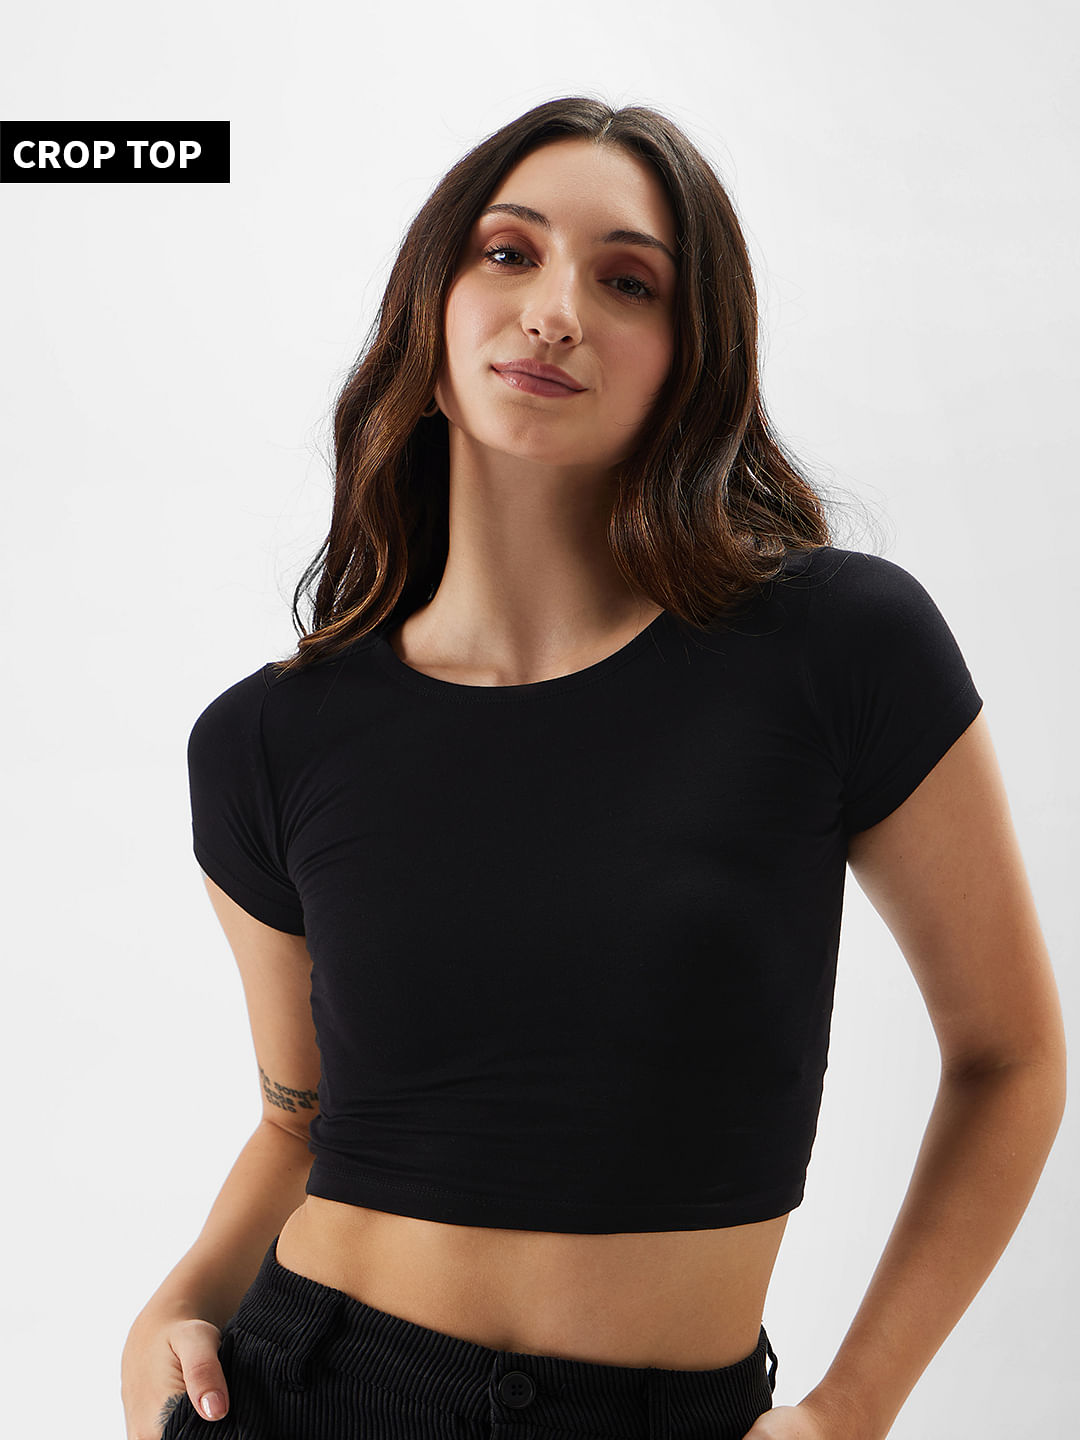 Buy Solids Black Womens Cropped Tops Online At The Souled Store 6850